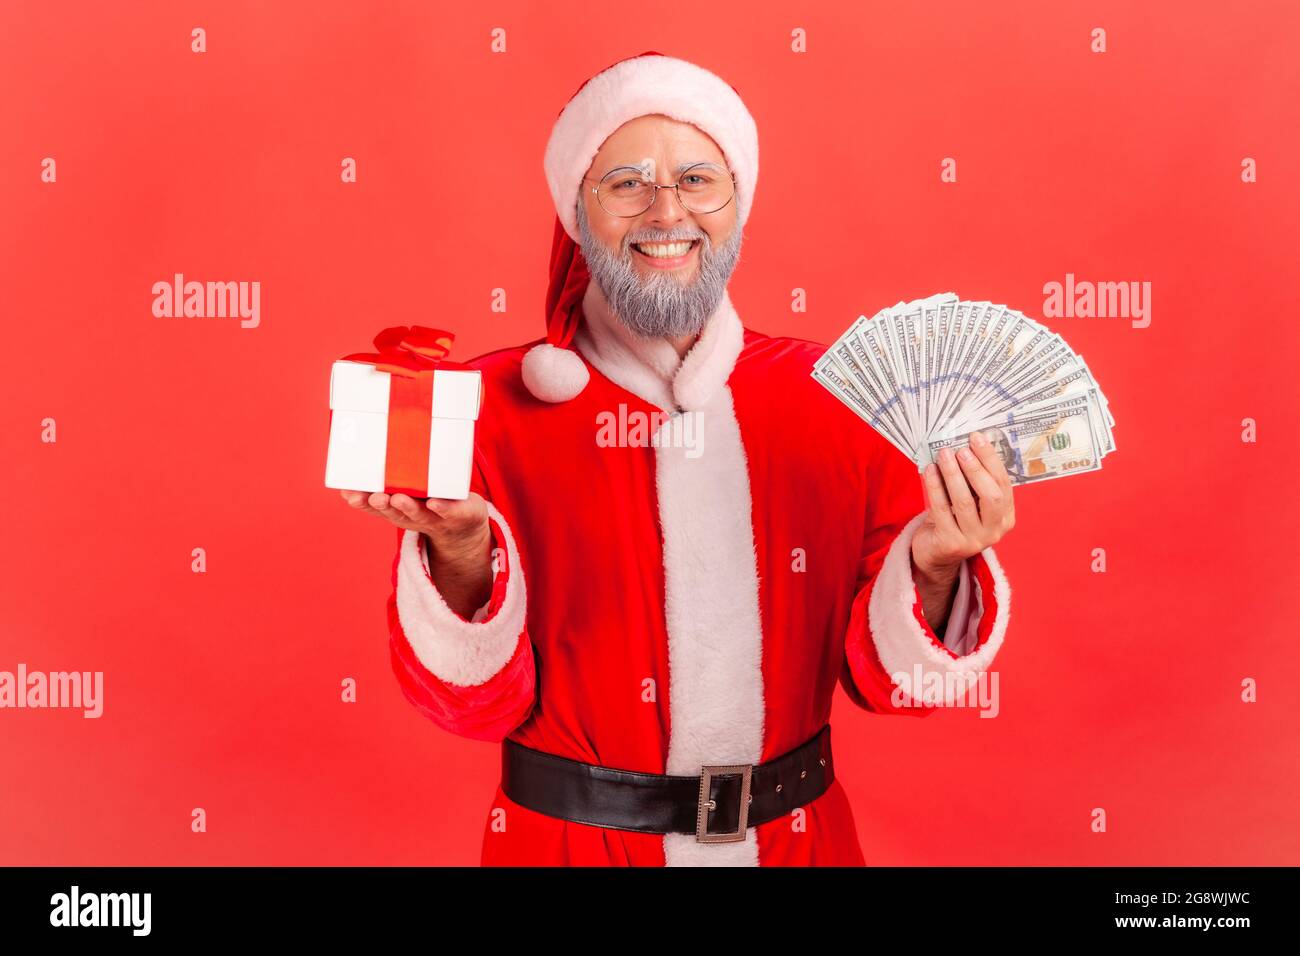 Smiling elderly man with gray beard wearing santa claus costume holding fan of money and wrapped present box, looking at camera with toothy smile. Ind Stock Photo